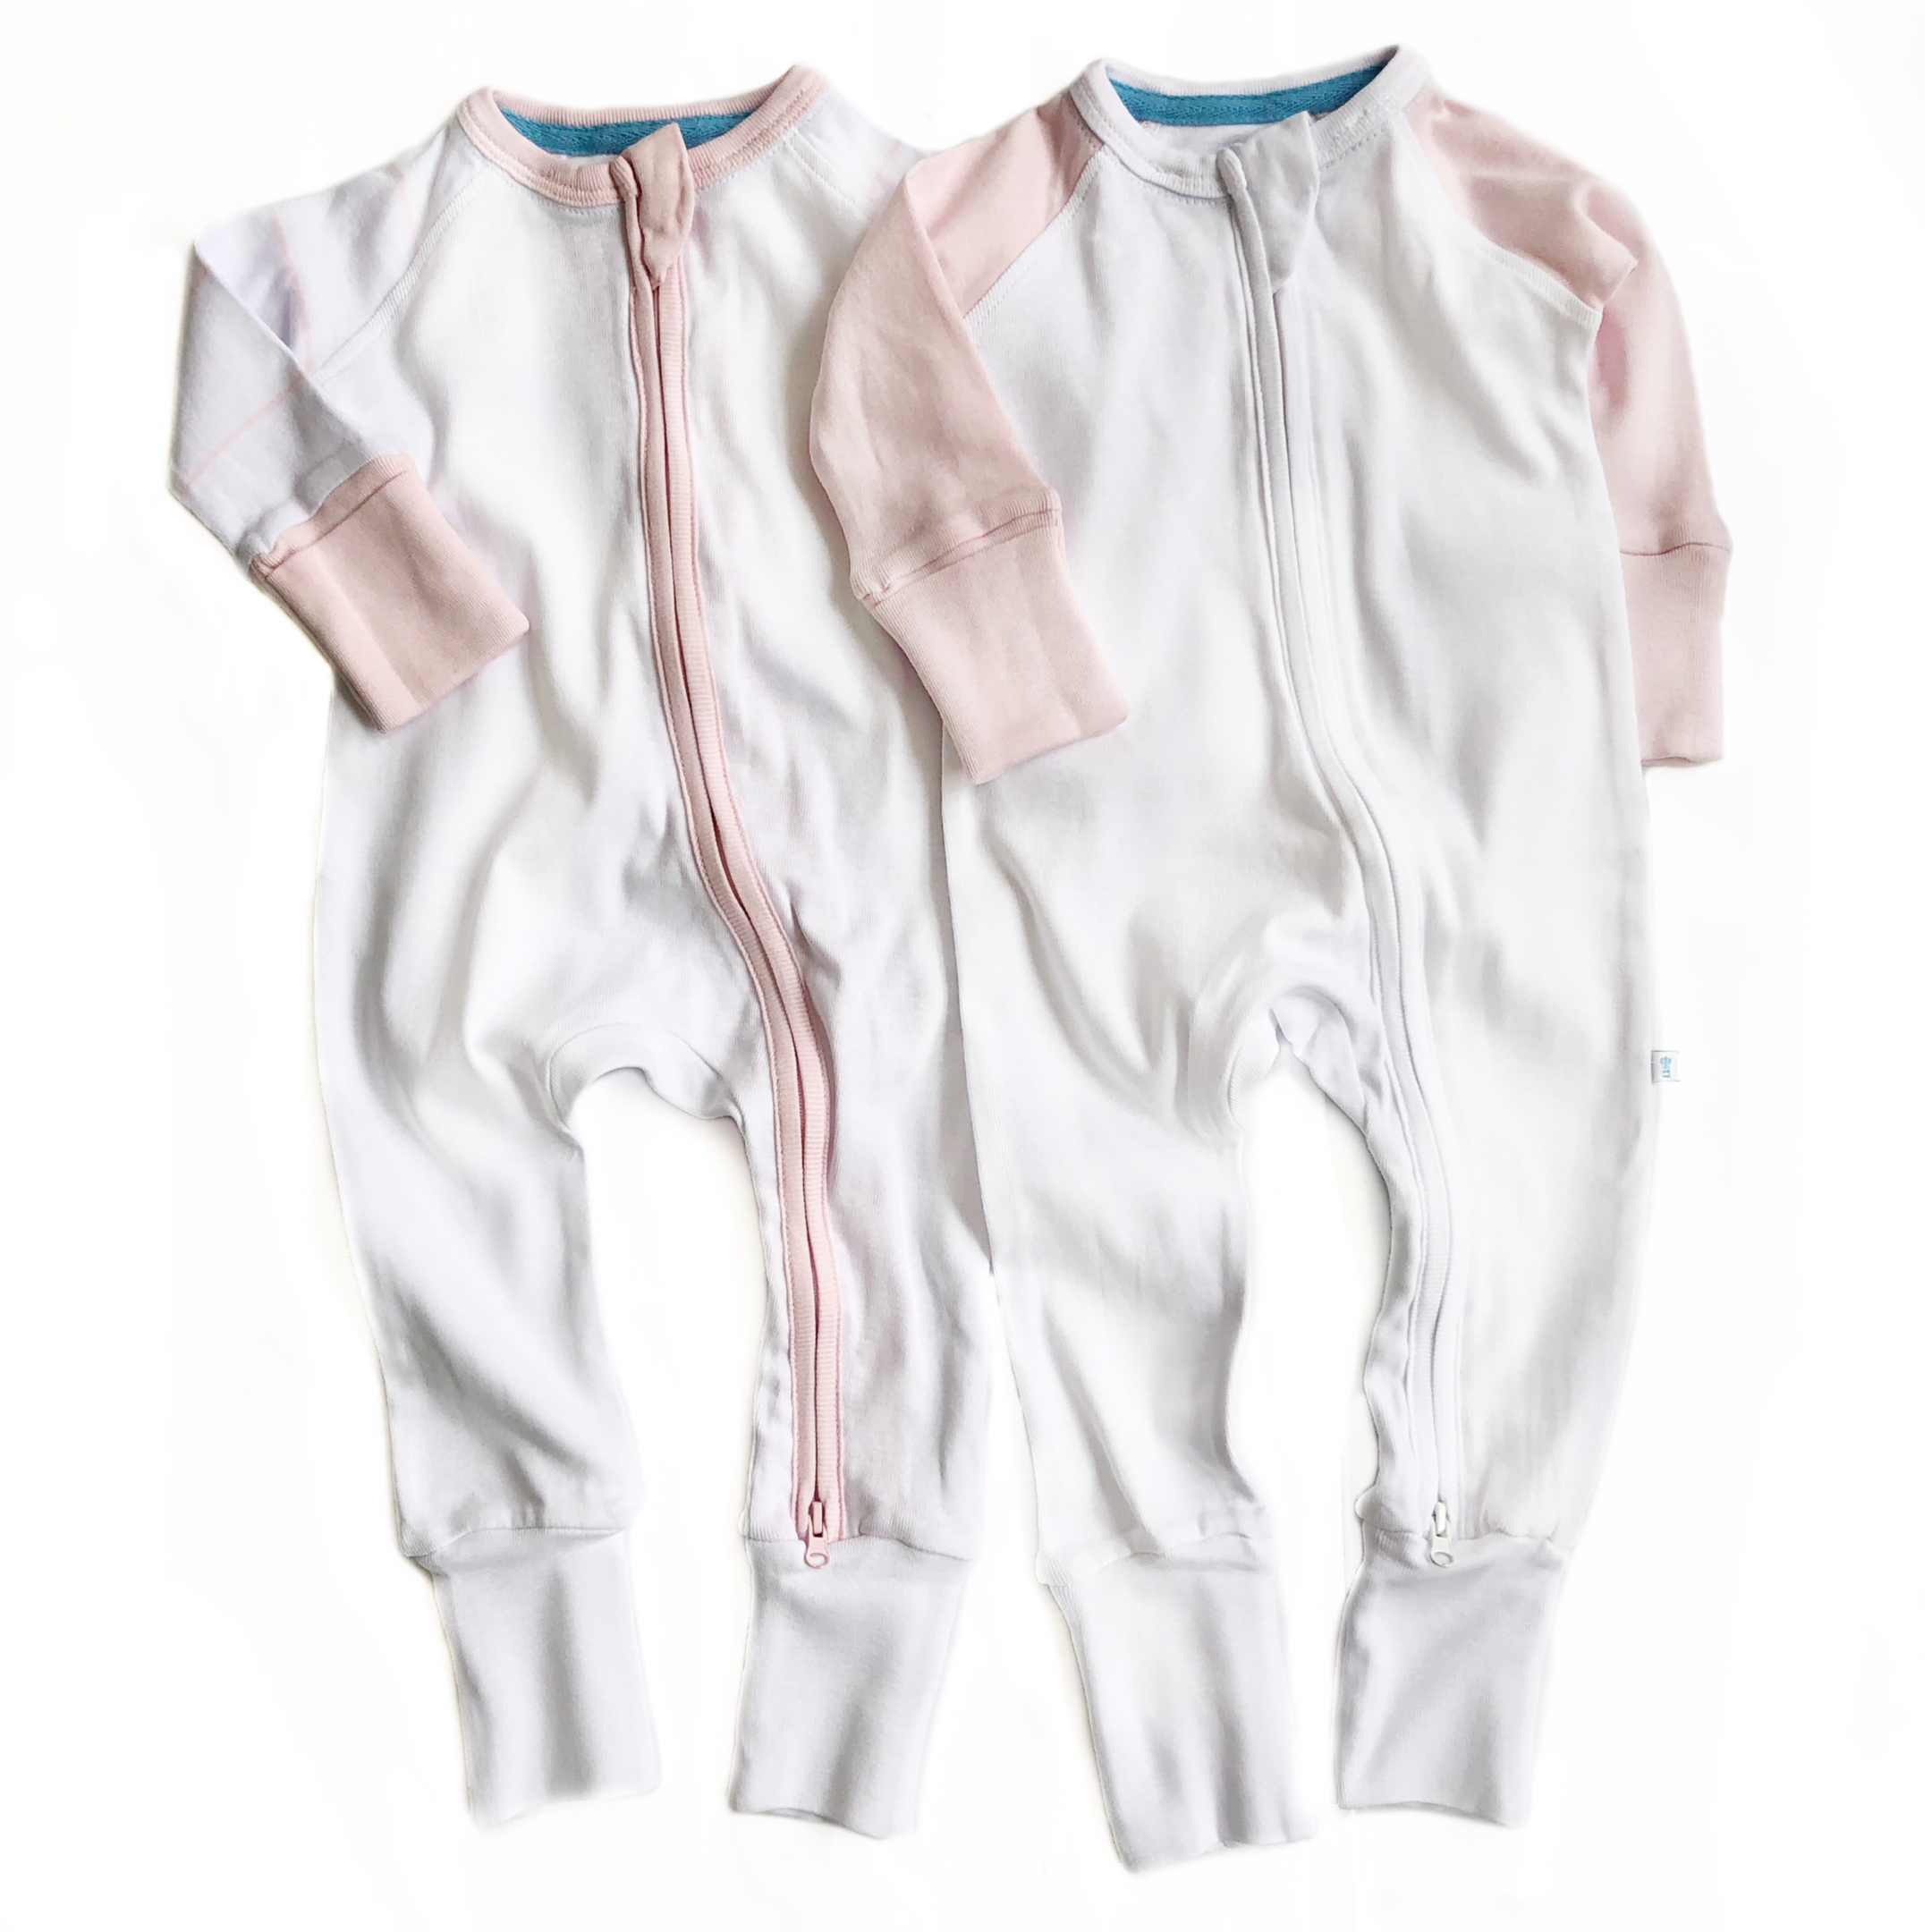 Baby Pink Multipack 6 Zipped Babygrows